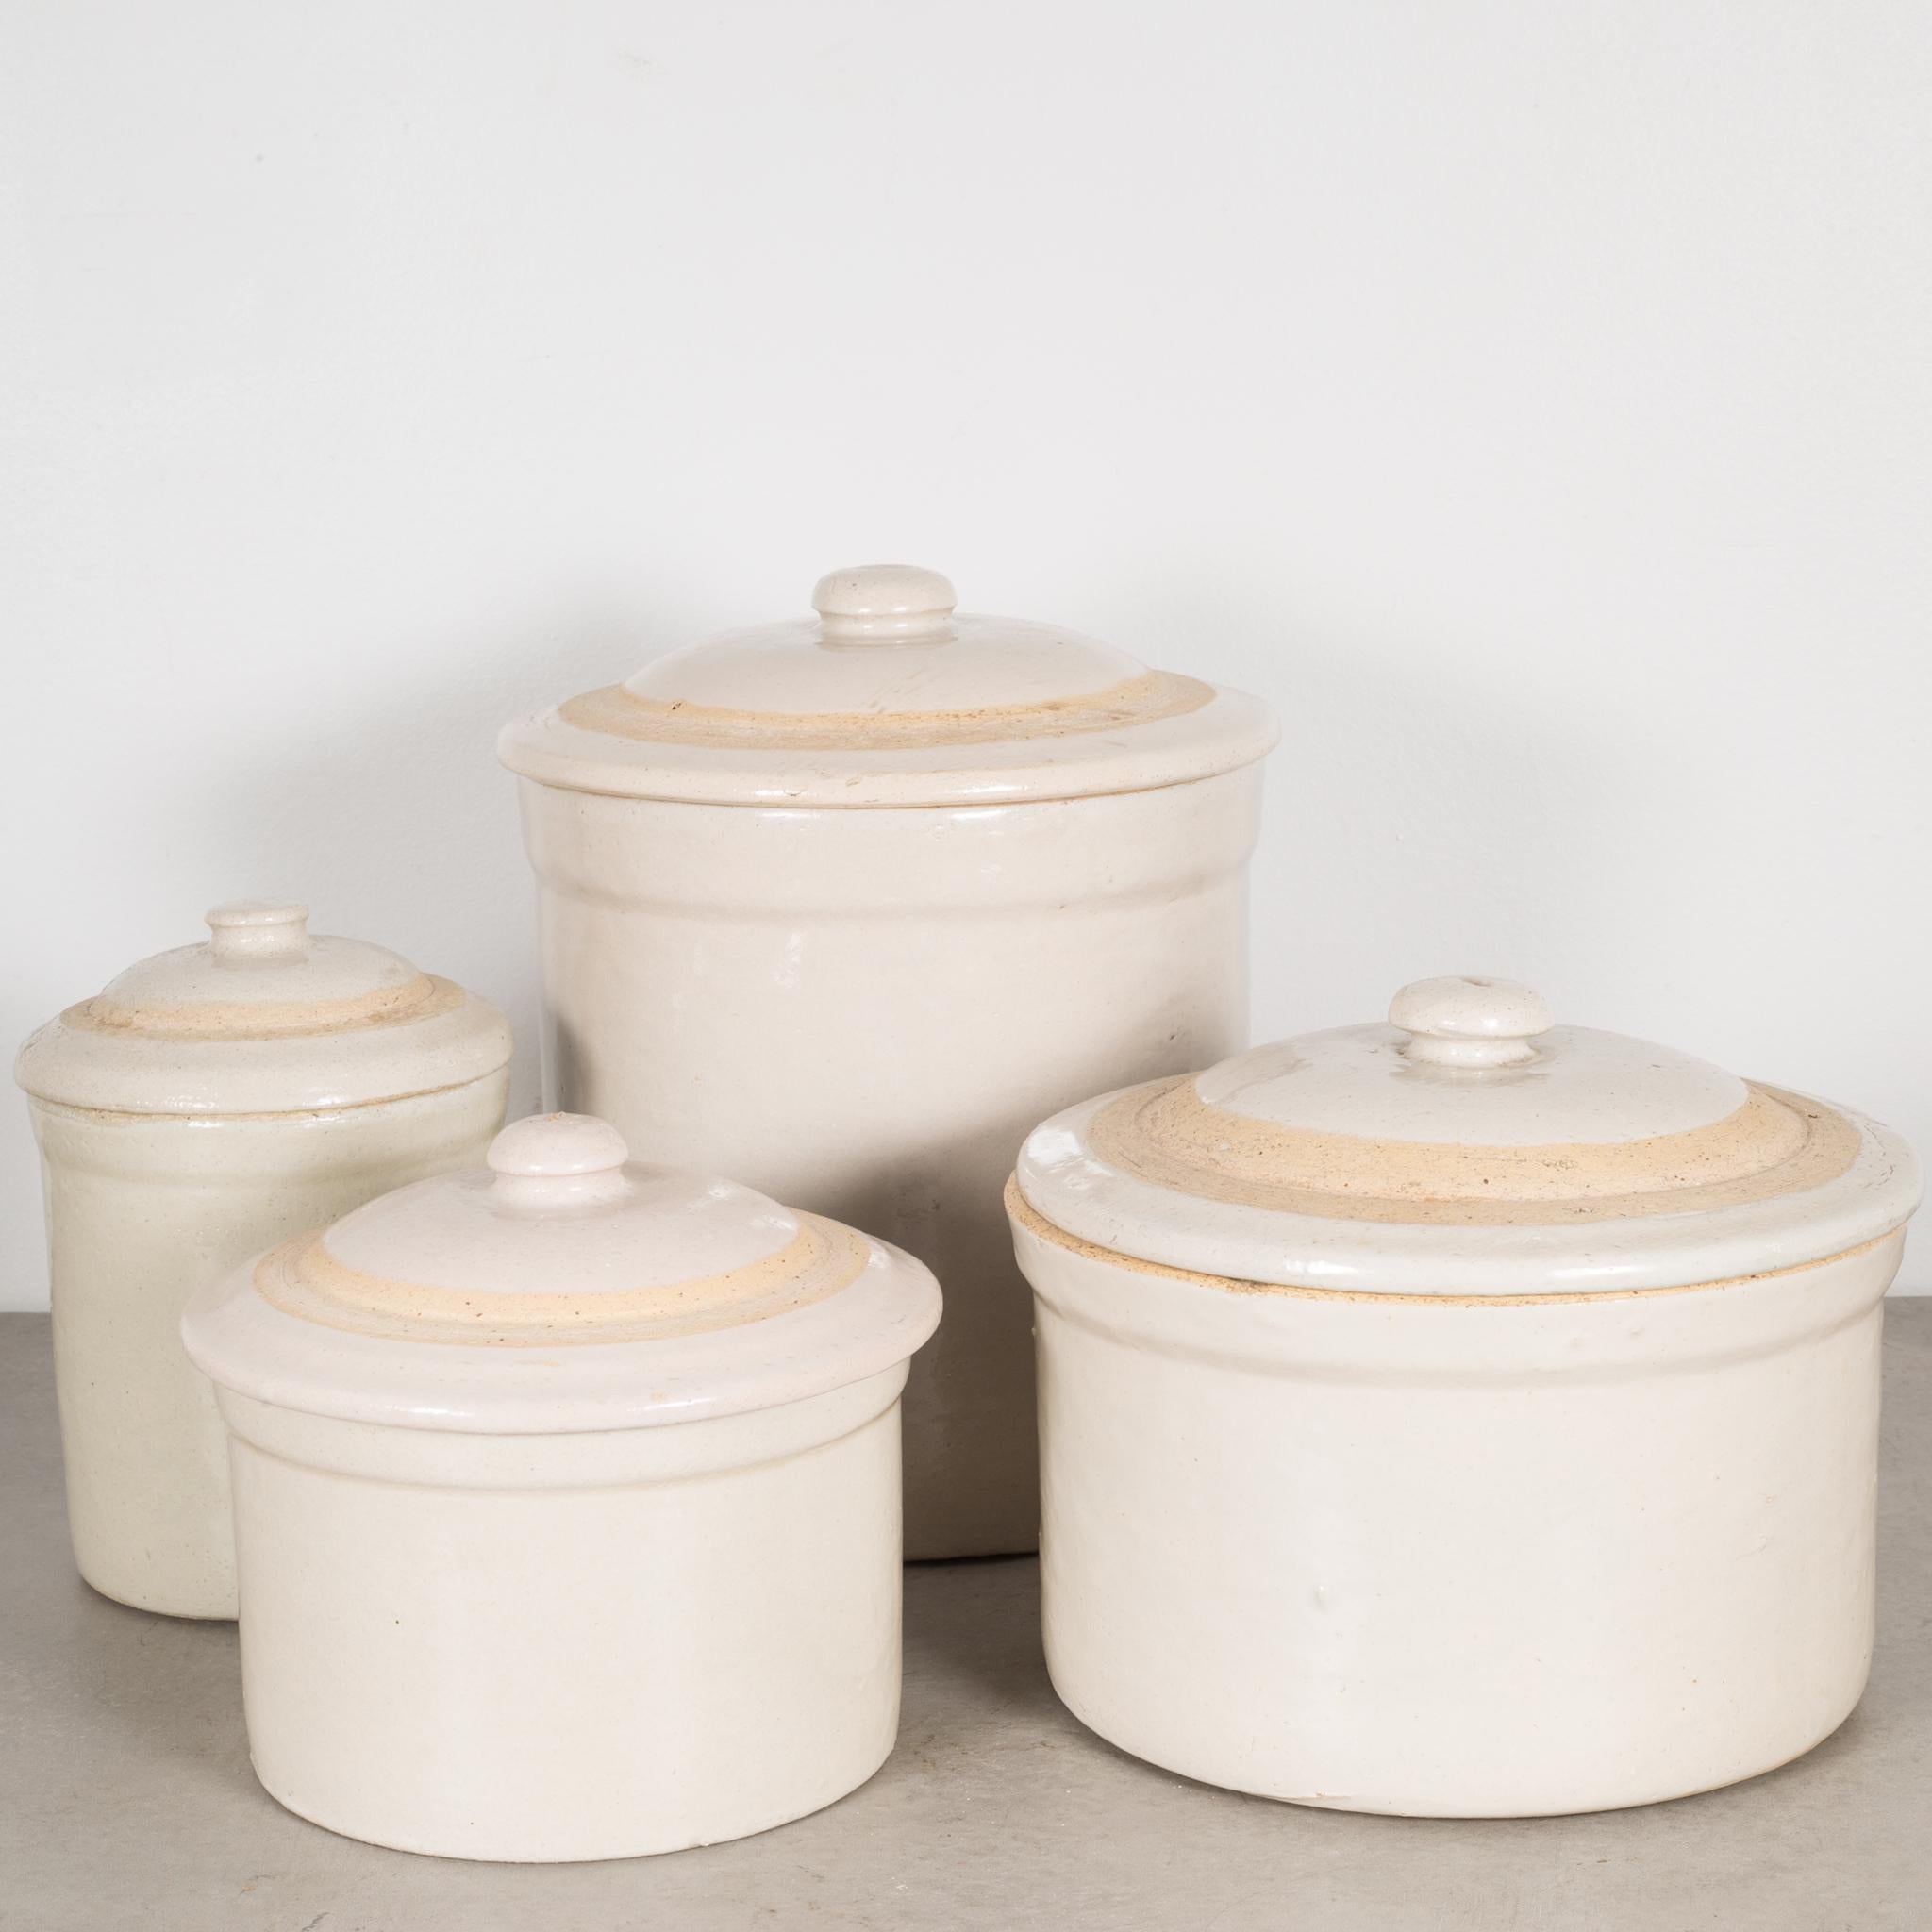 20th Century Stoneware Pottery Crock with Lid, circa 1980